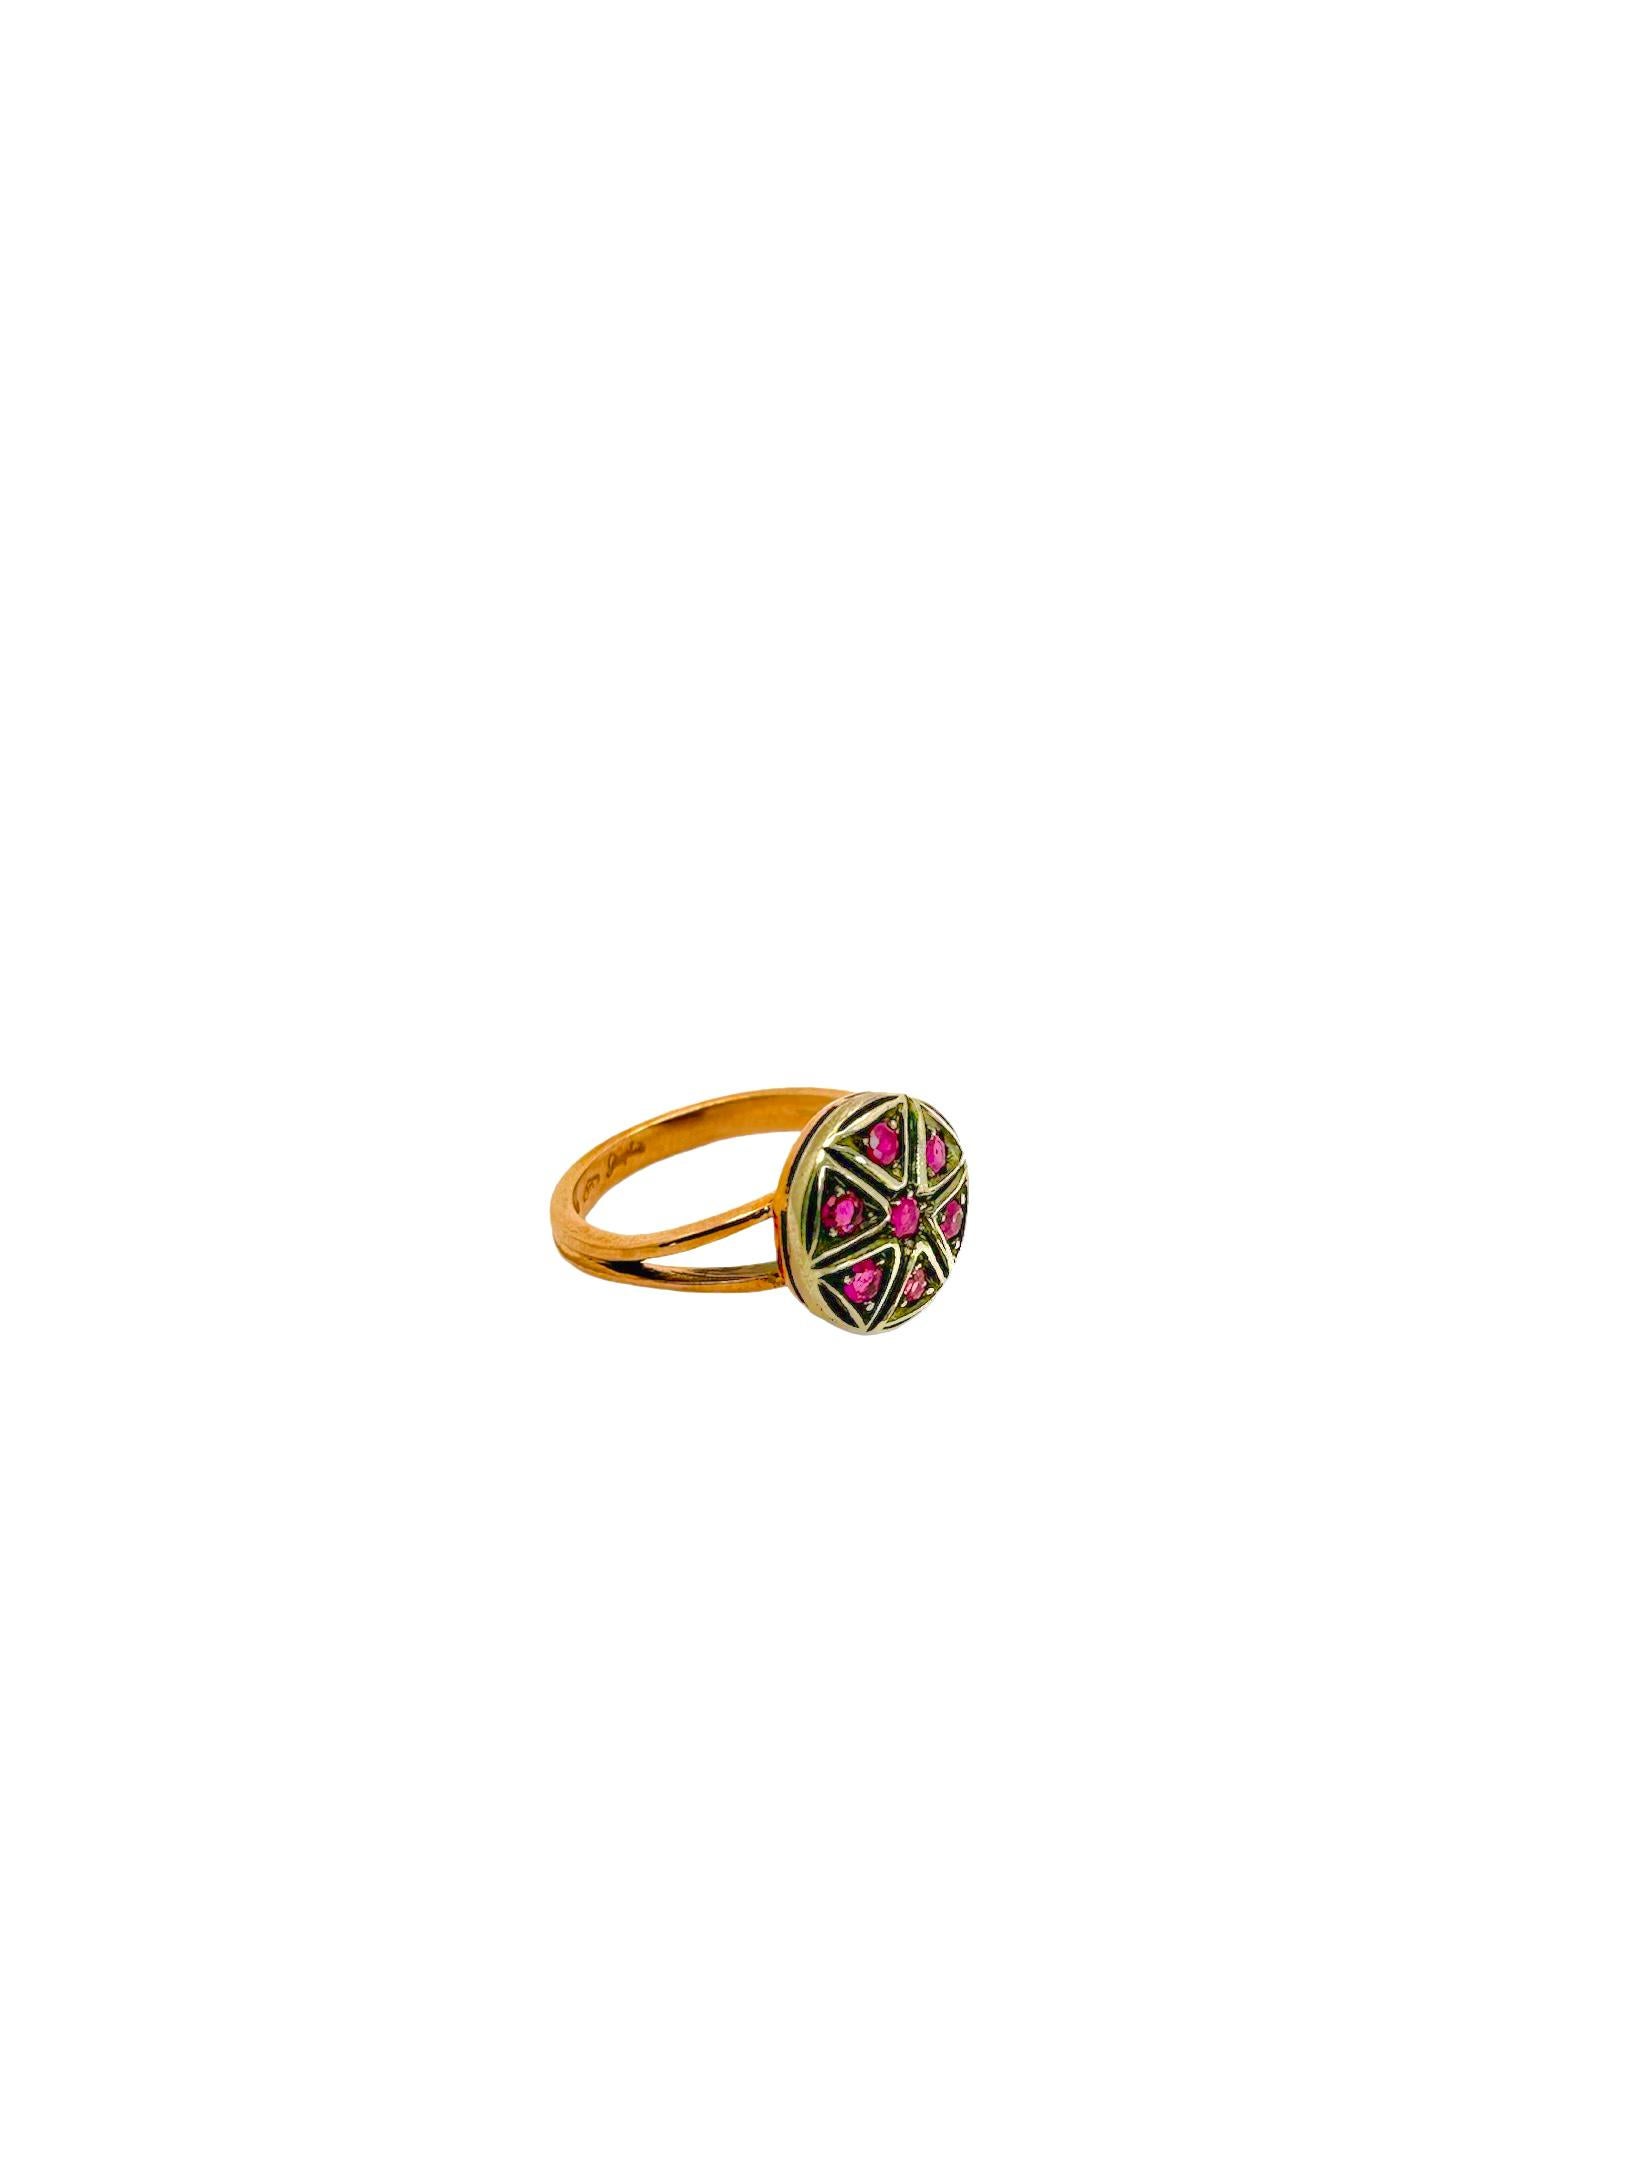 Women's or Men's Victorian Era Pink Gold and Sterling Silver Rubies Ring For Sale